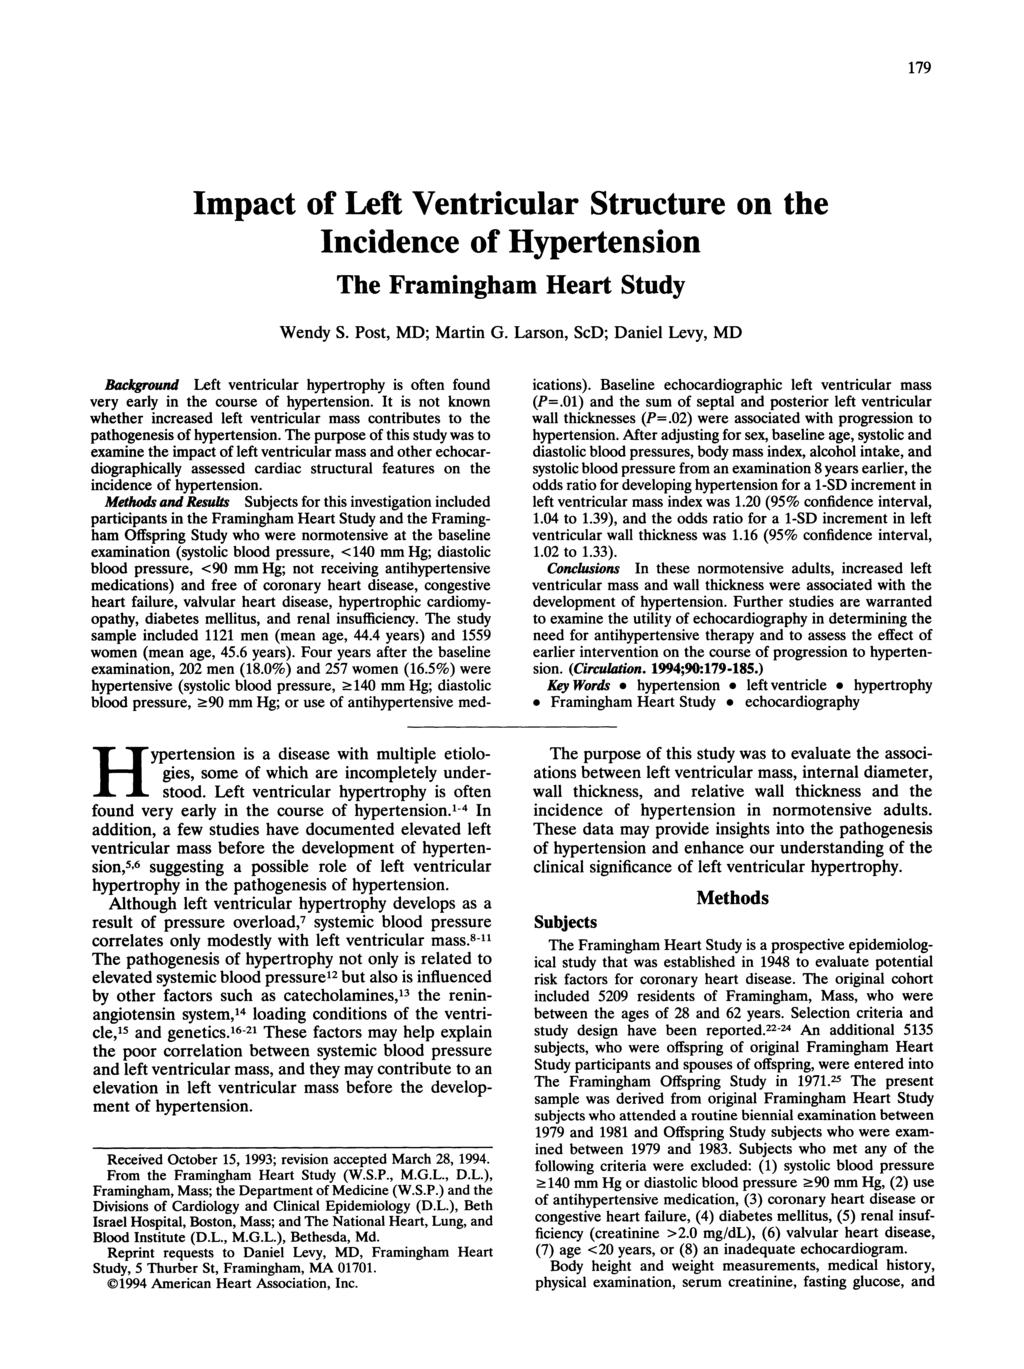 179 Impact of Left Ventricular Structure on the Incidence of Hypertension The Framingham Heart Study Wendy S. Post, MD; Martin G. Larson, ScD; Daniel Levy, MD Downloaded from http://ahajournals.